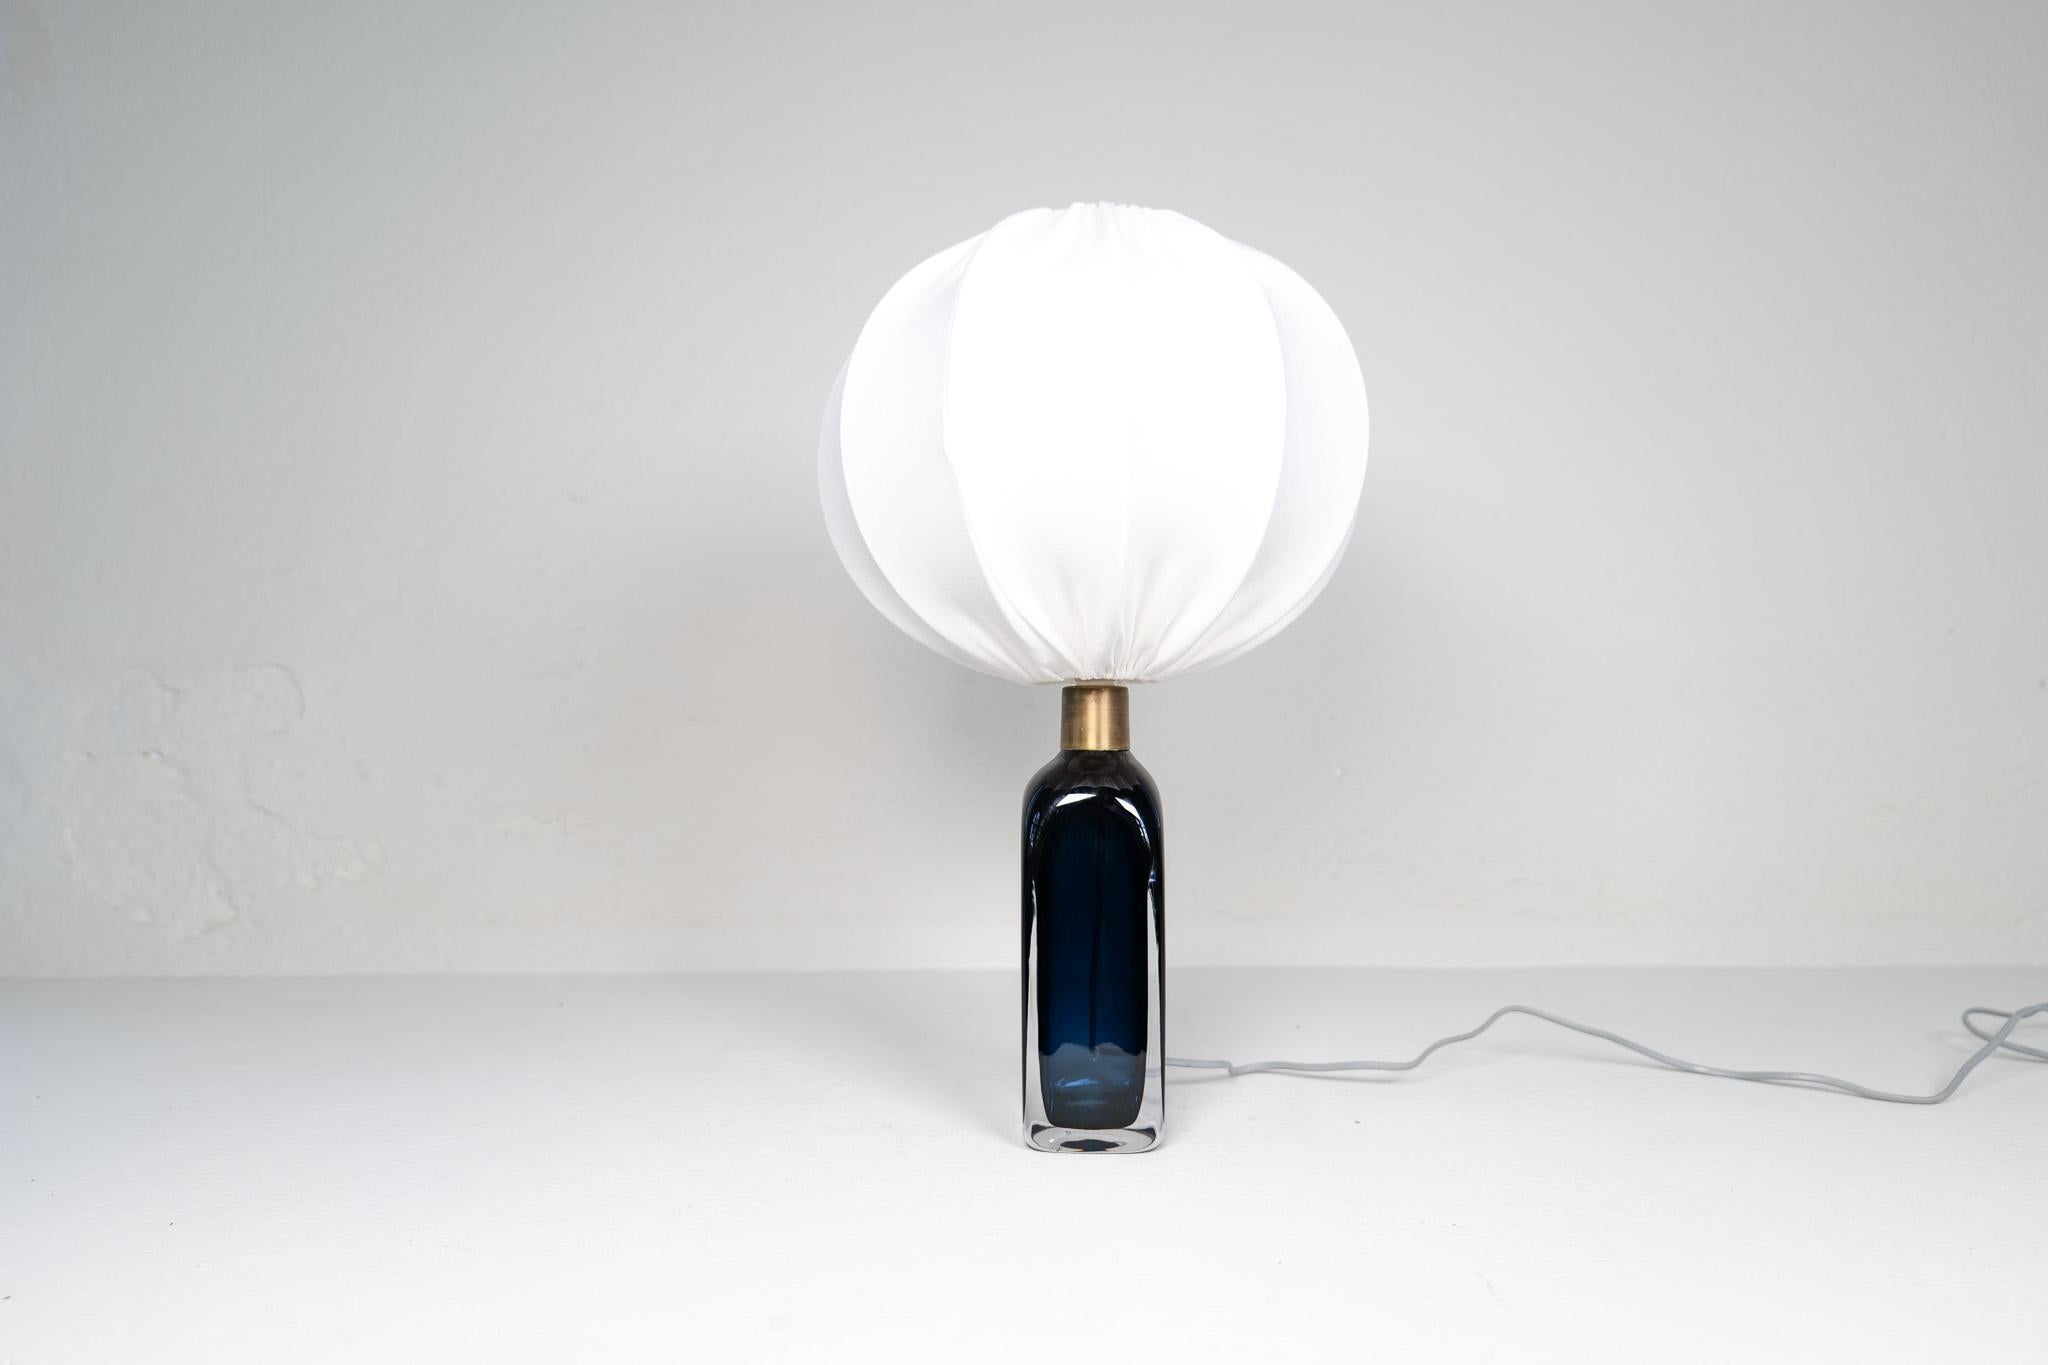 Mid-20th Century Midcentury Modern Table Lamp by Carl Fagerlund for Orrefors Sweden RD 1406 For Sale